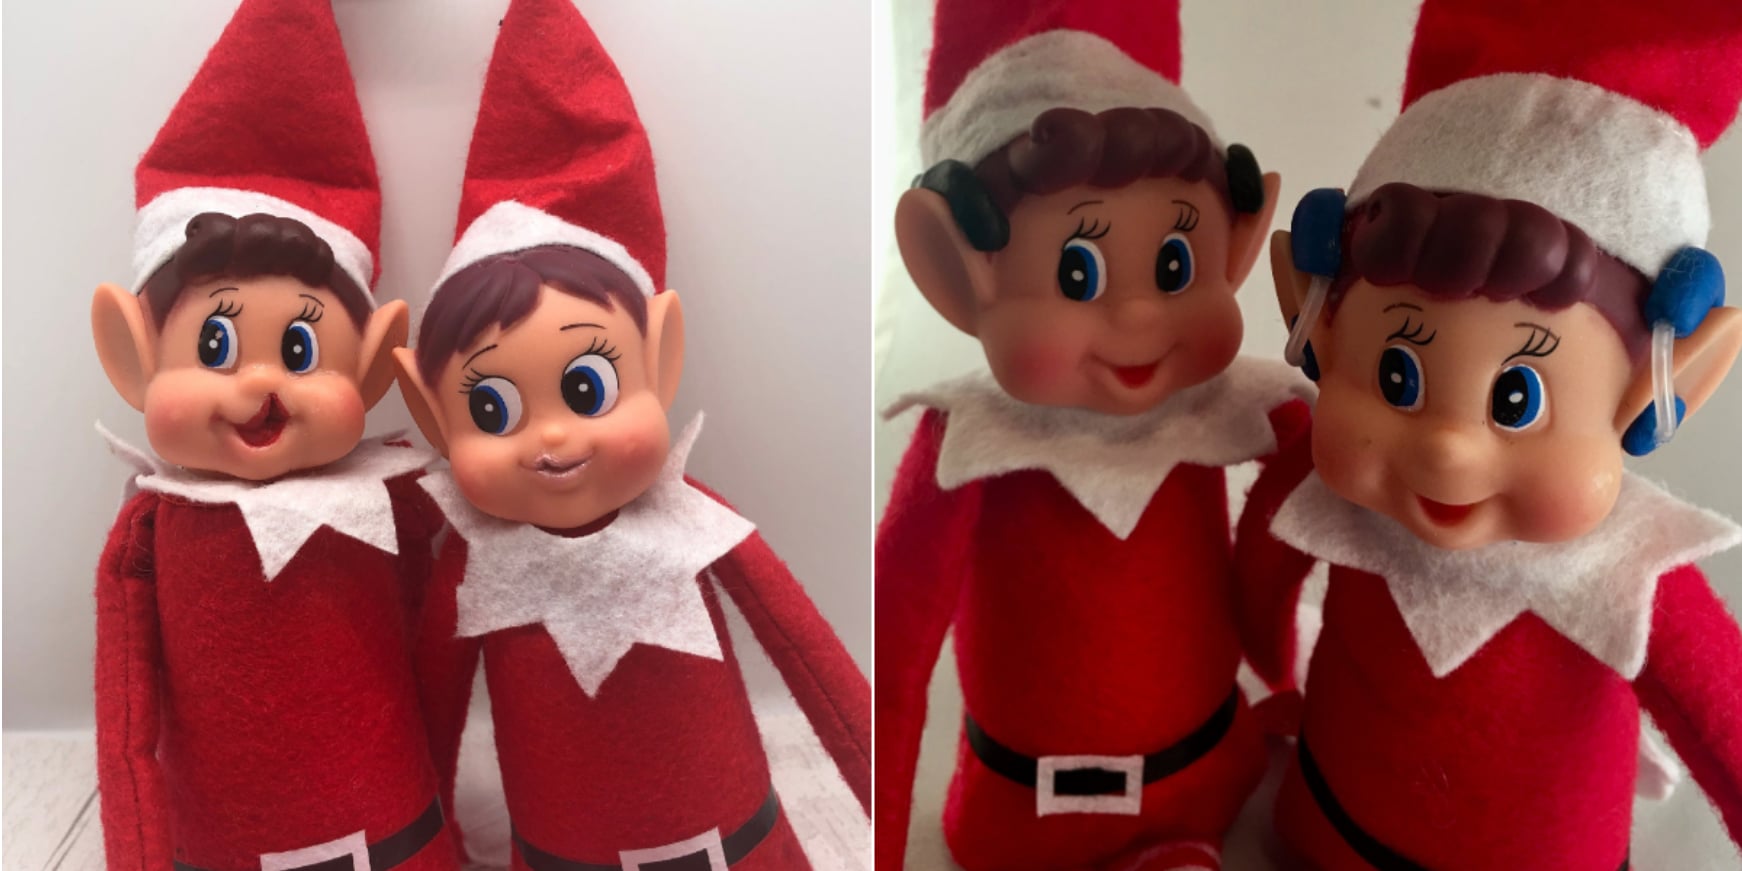 Modified Christmas Elf Dolls For Kids With Disabilities | POPSUGAR Family